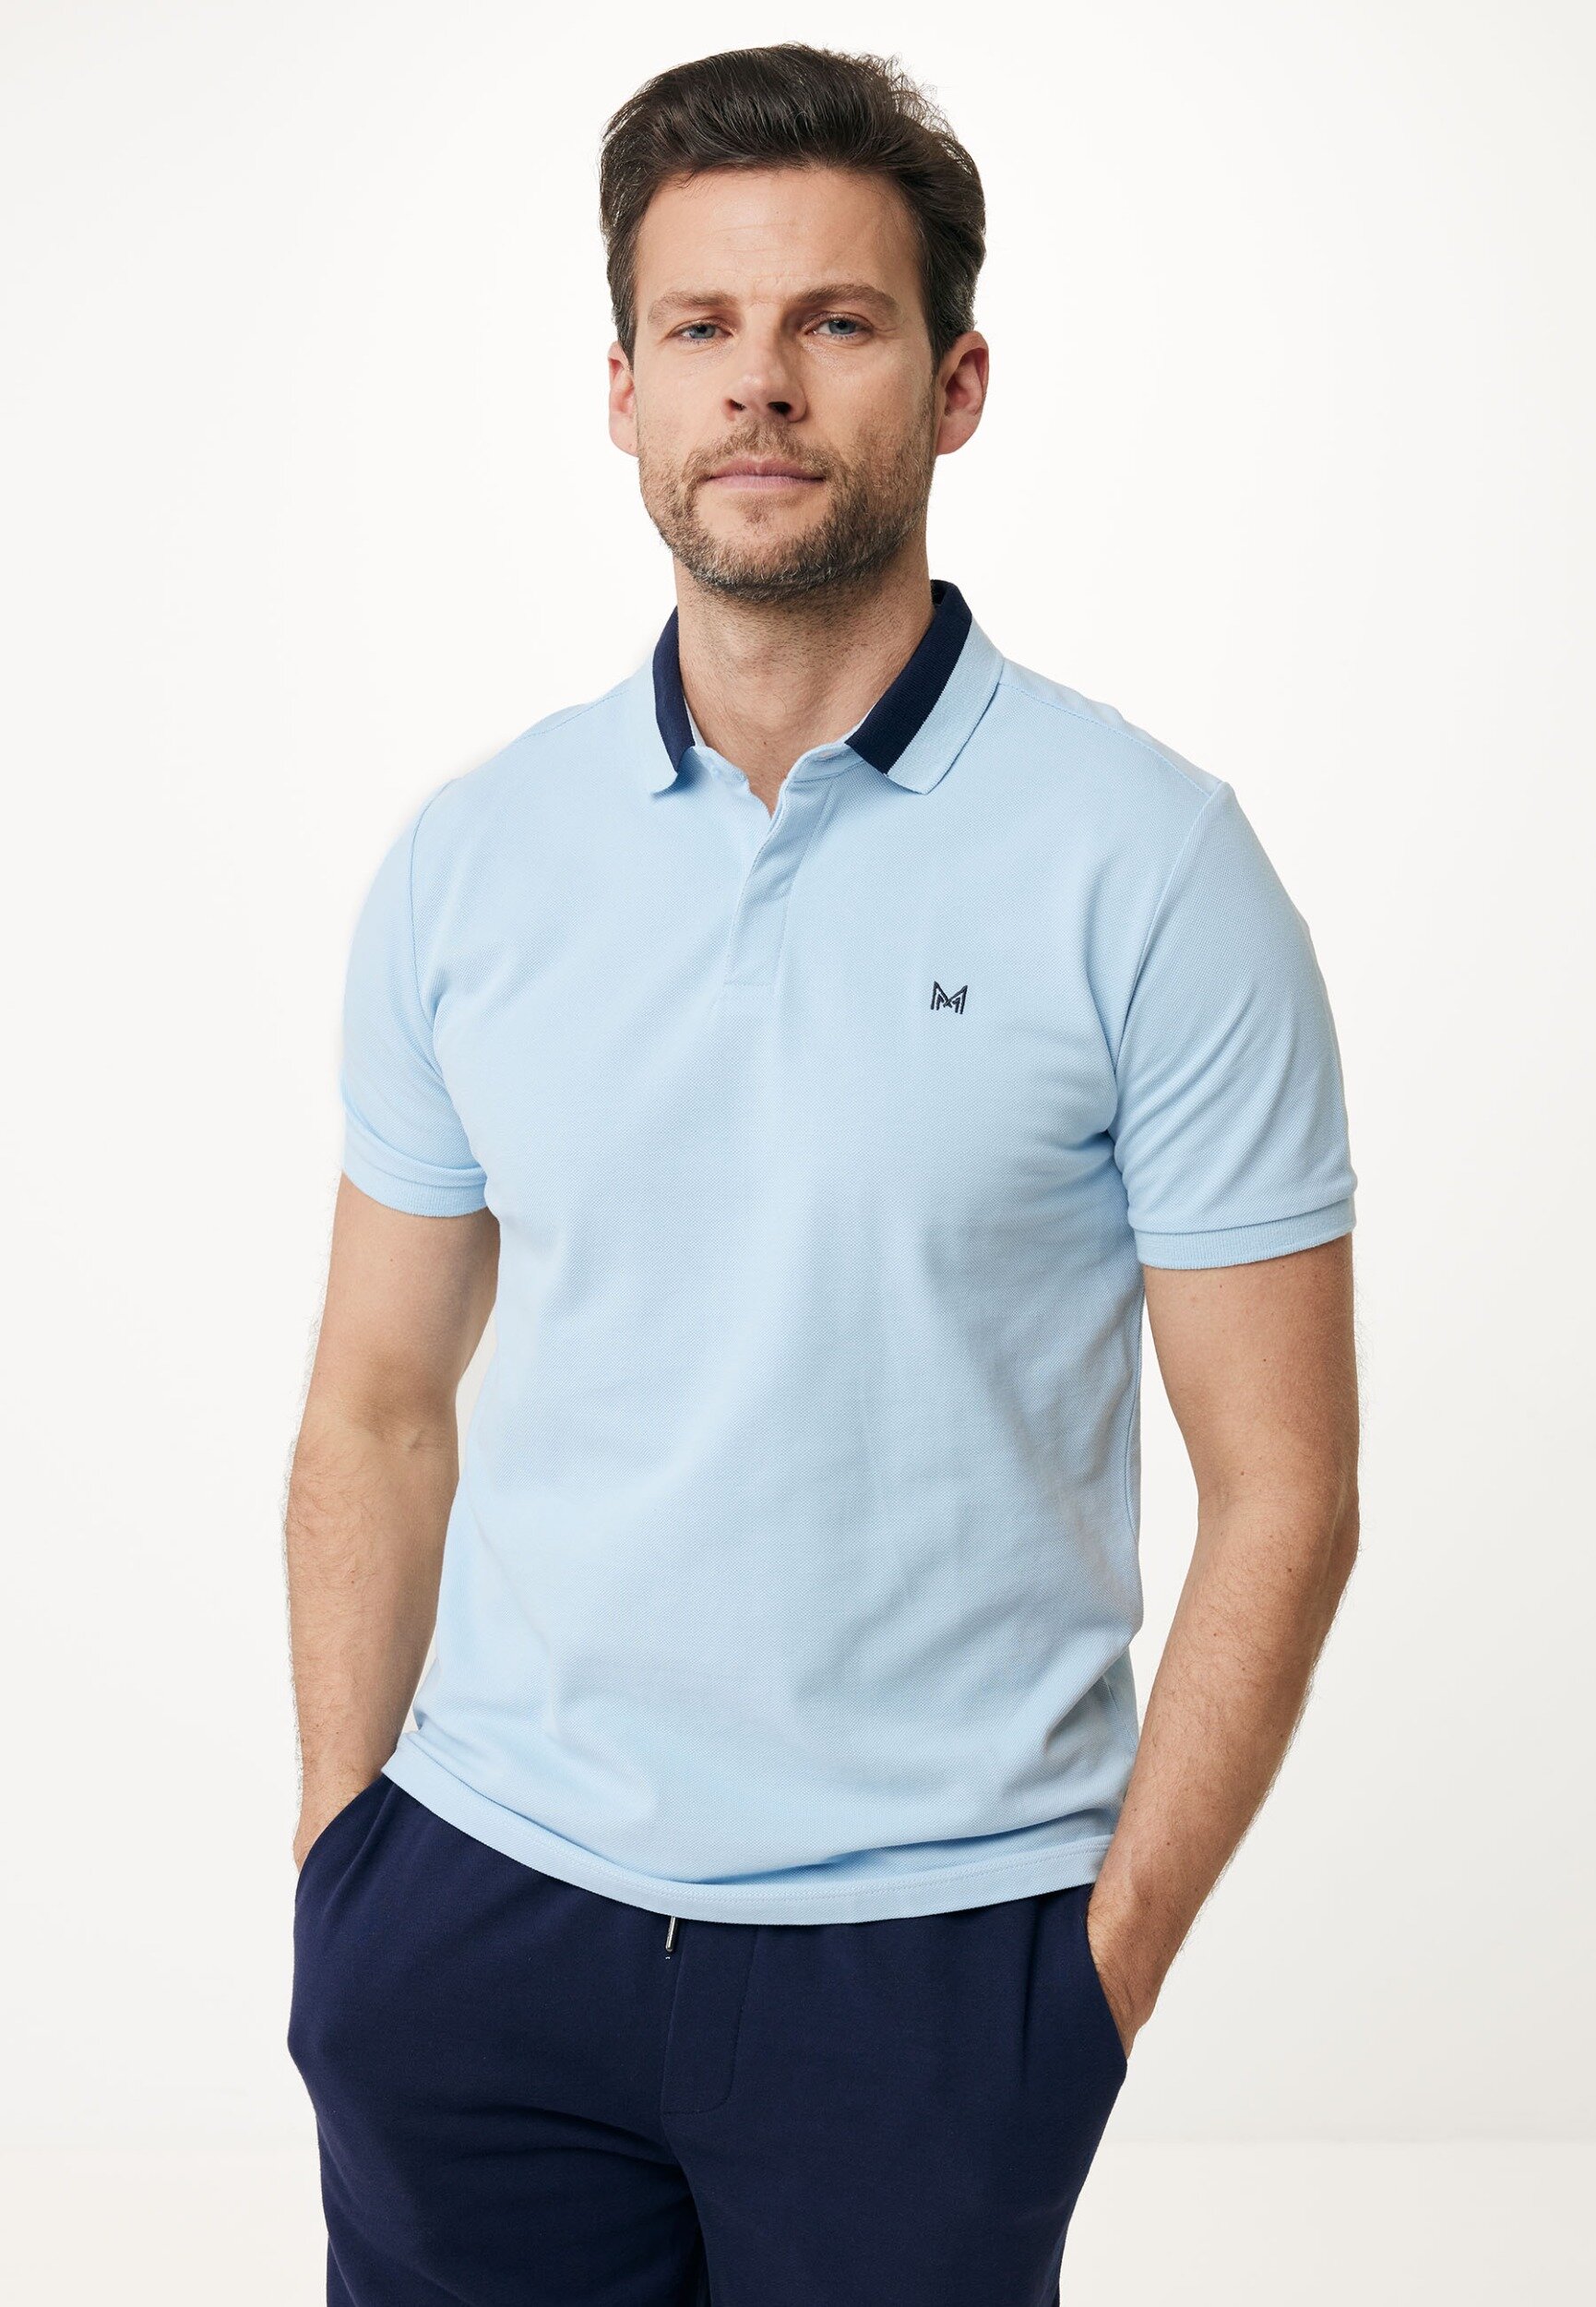 Mexx Short Sleeve Polo With Color Block Collar Mannen - Fresh Blauw - Maat M